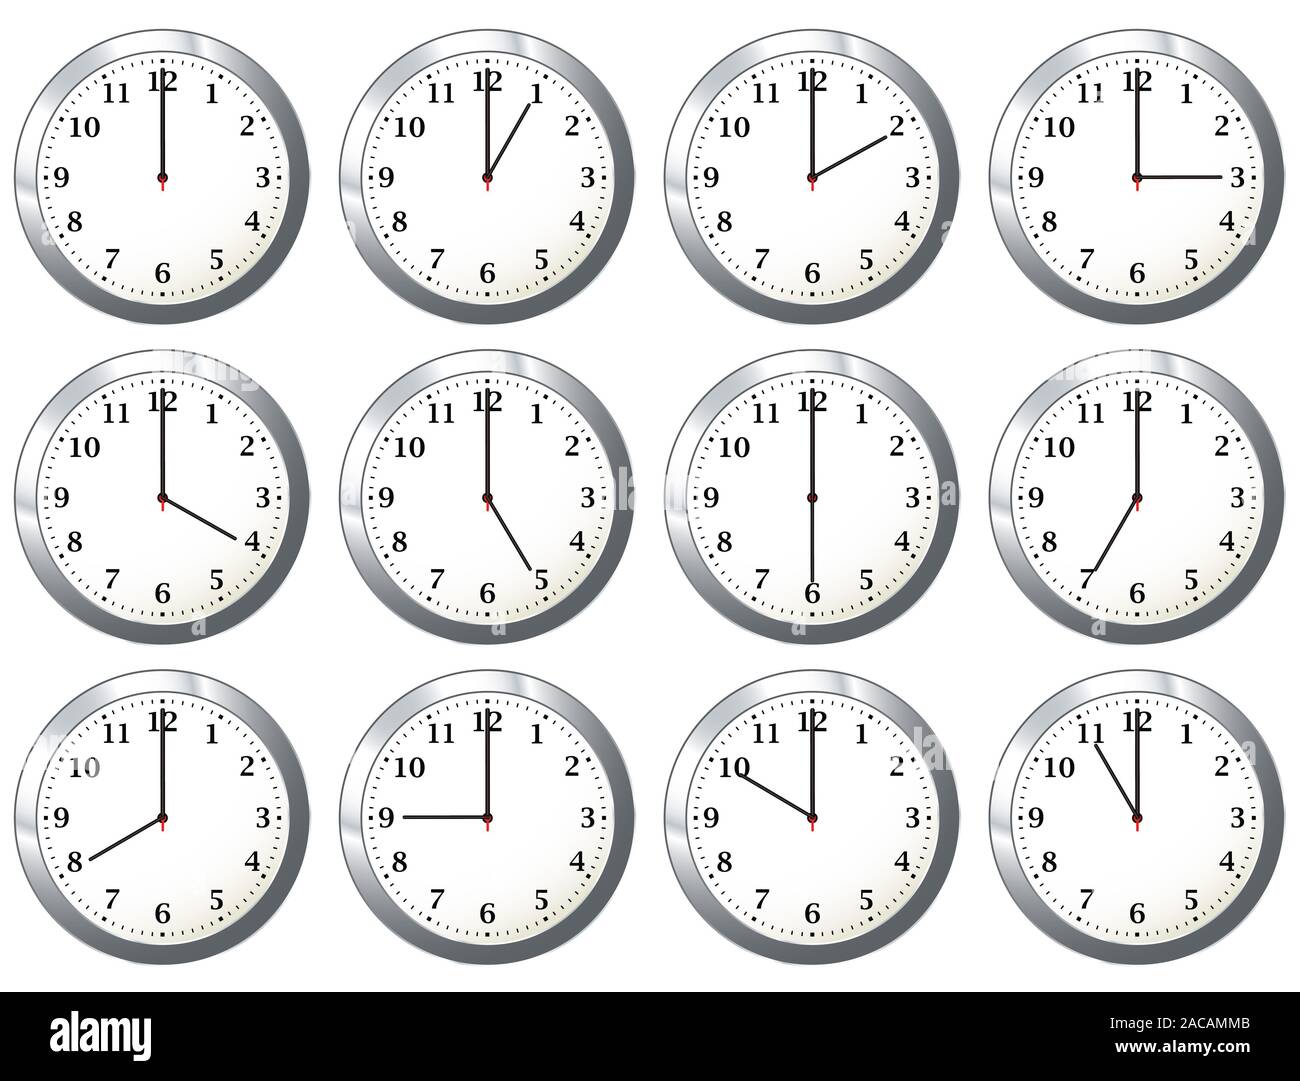 office clock all times Stock Photo